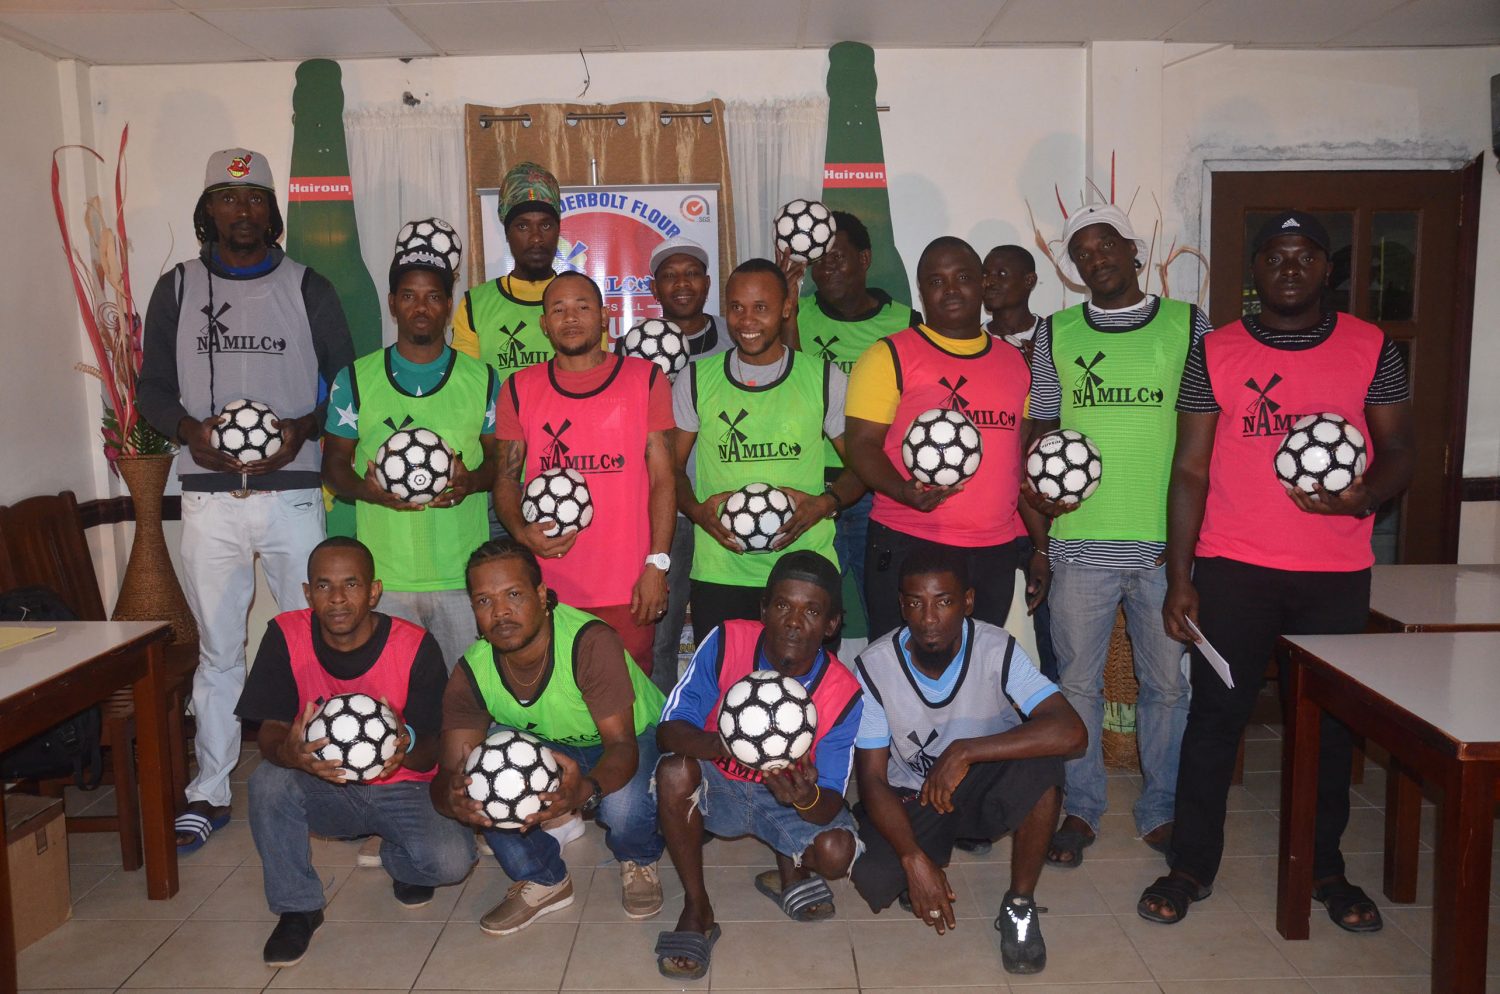 Players and representatives from several of the competing teams, displaying their practice balls and playing bibs for the Corona Futsal Championship